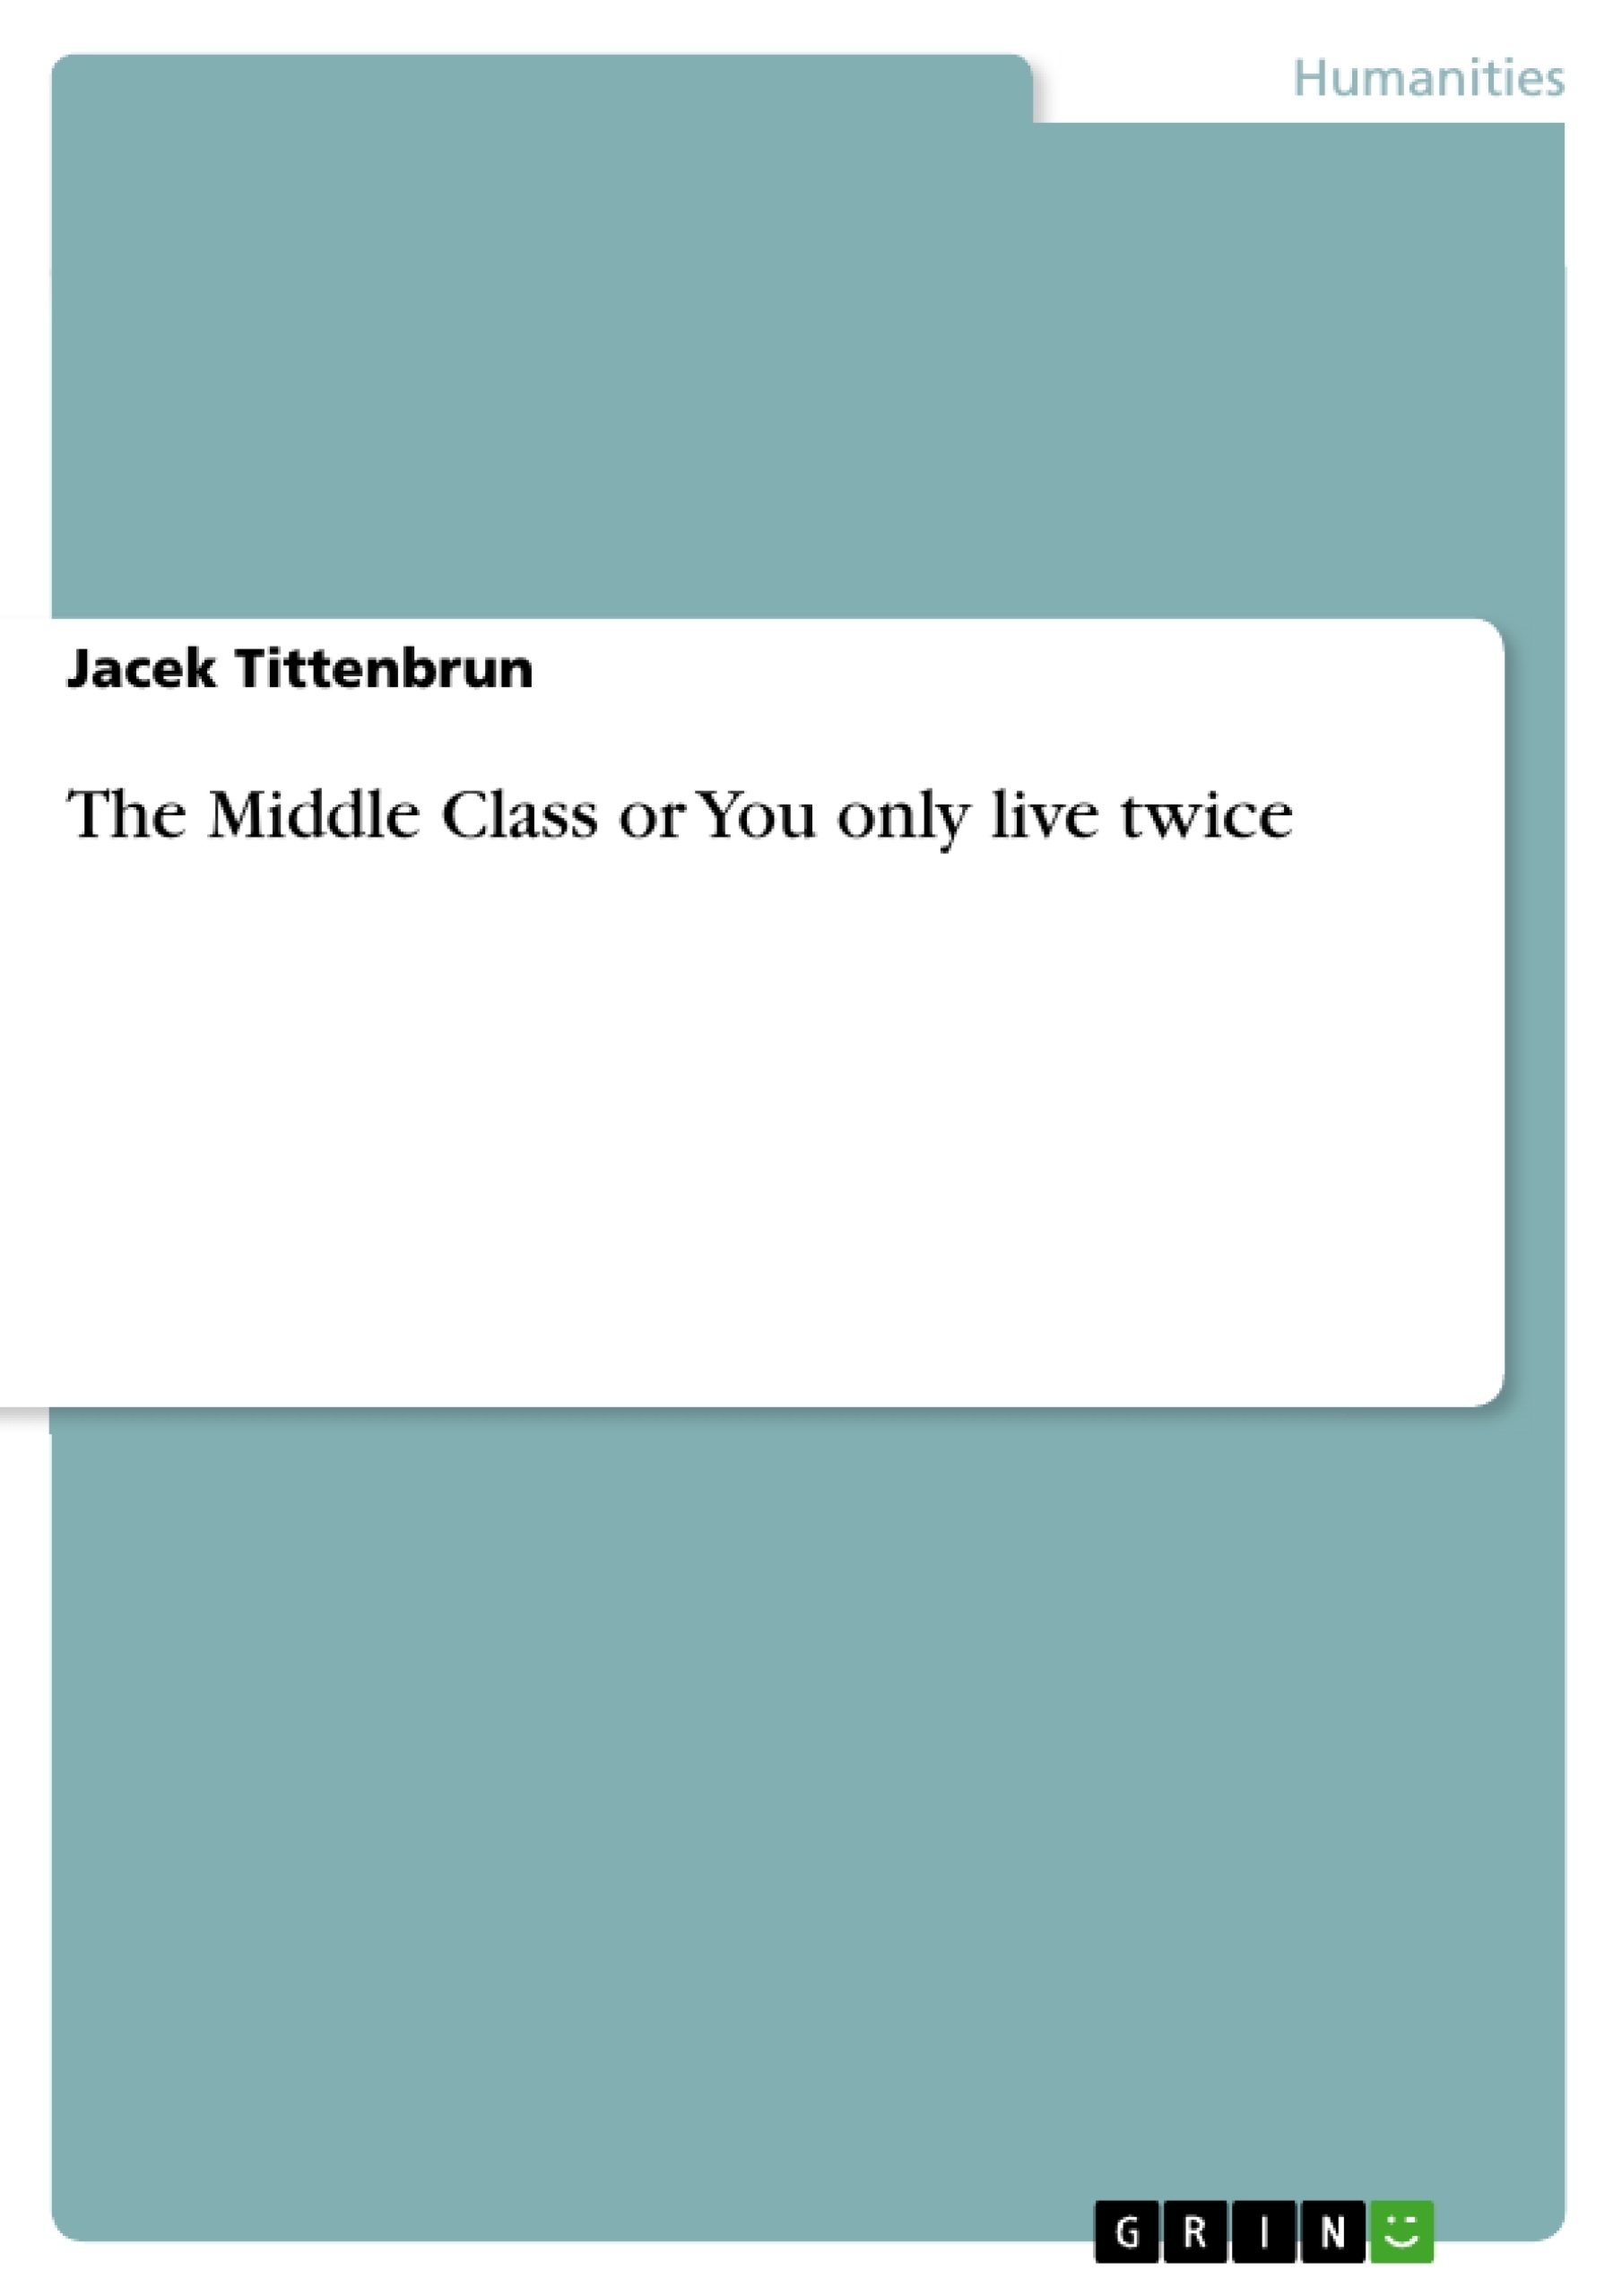 live　twice　GRIN　The　You　or　Middle　Class　only